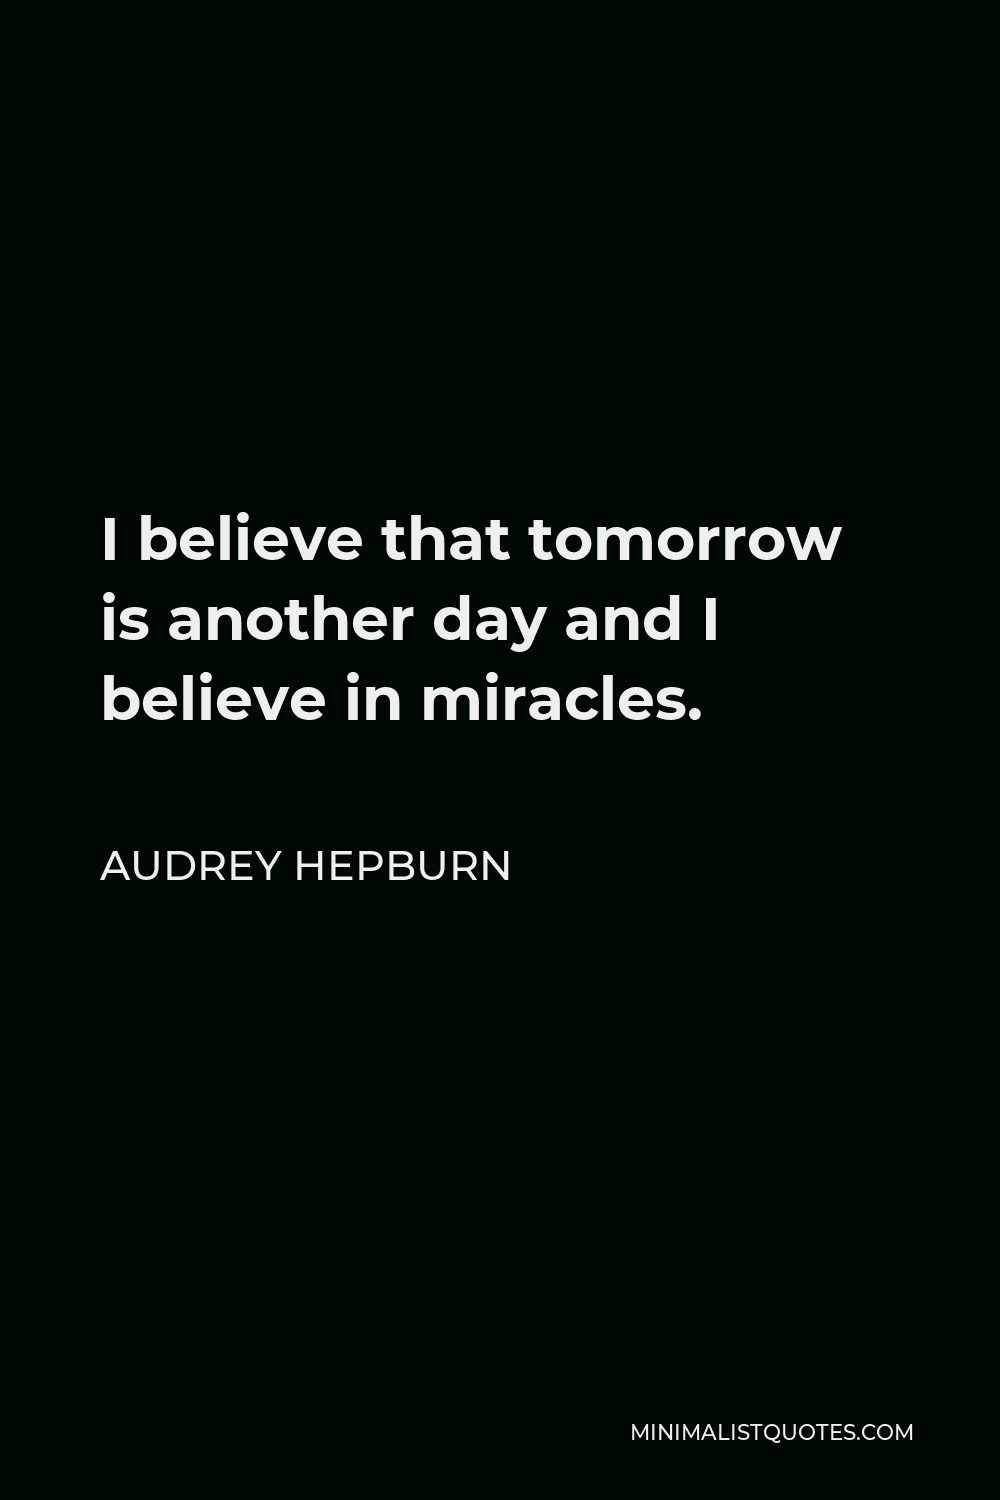 Audrey Hepburn Quote - I believe that tomorrow is another day and I believe in miracles.